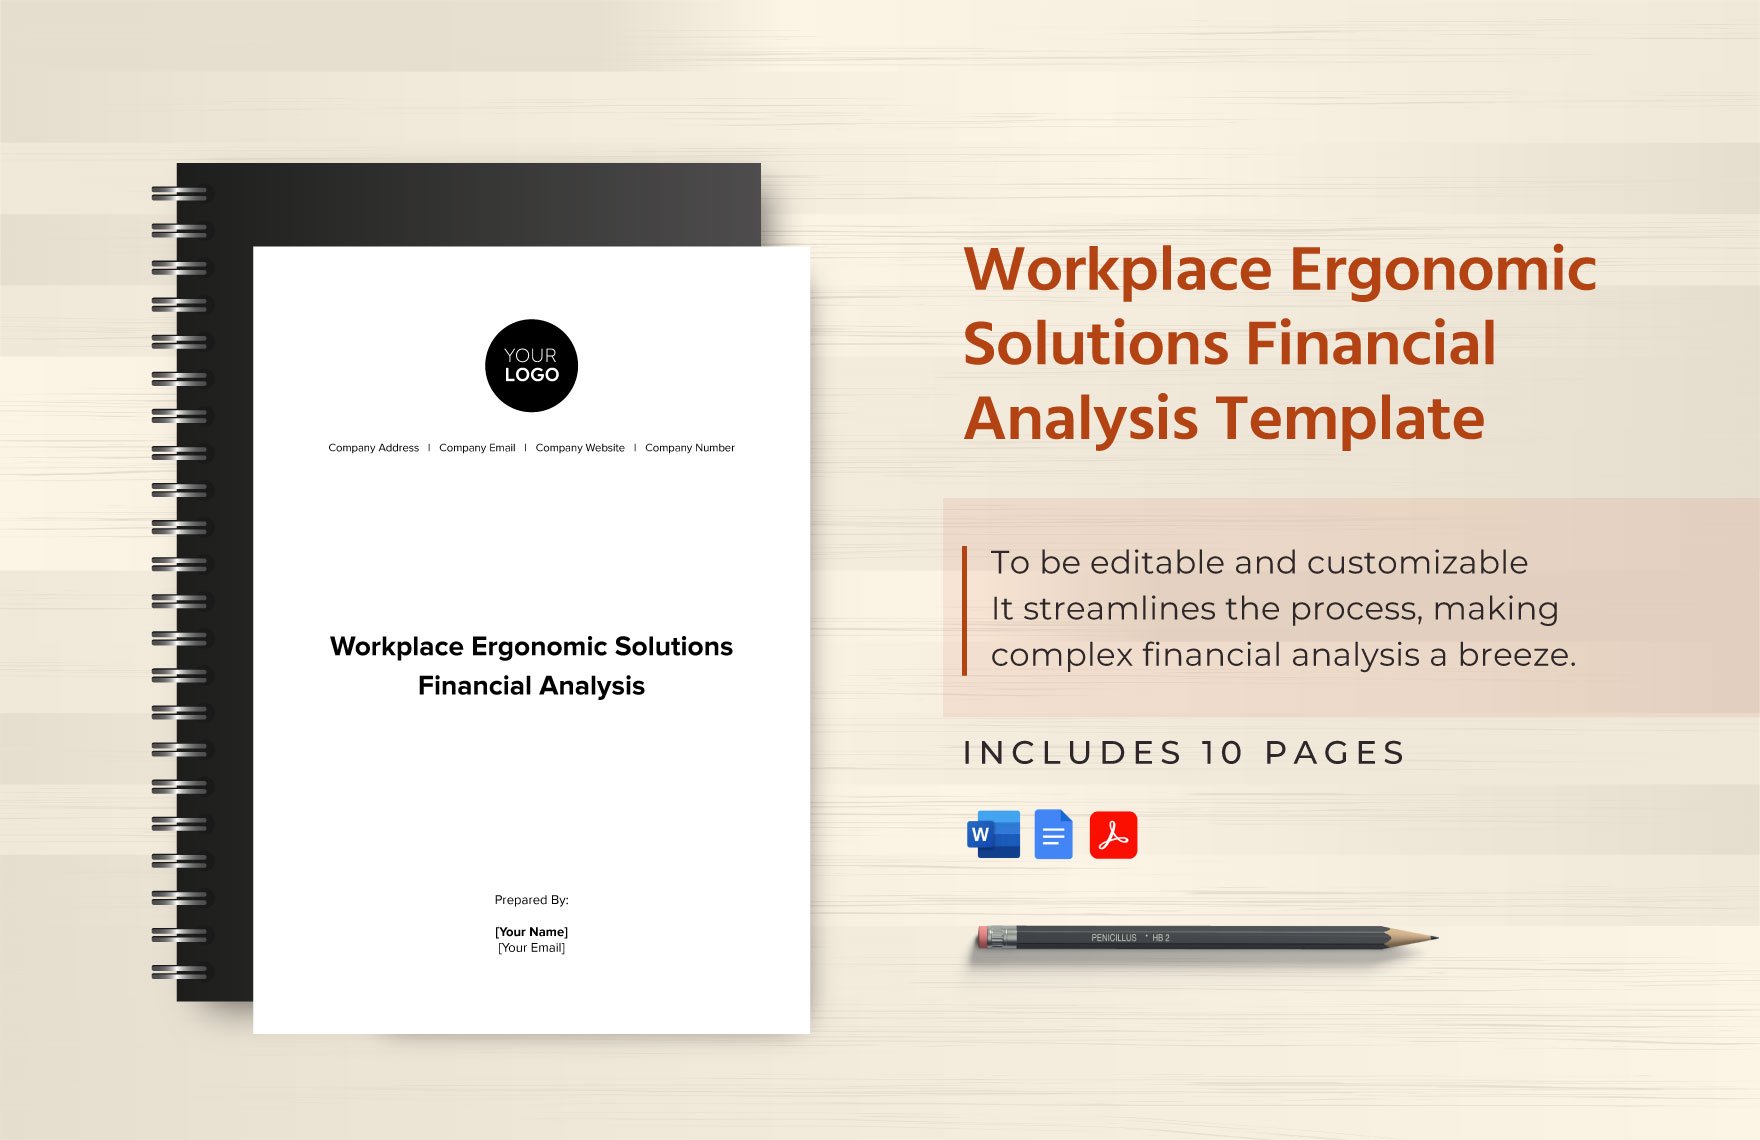 Workplace Ergonomic Solutions Financial Analysis Template